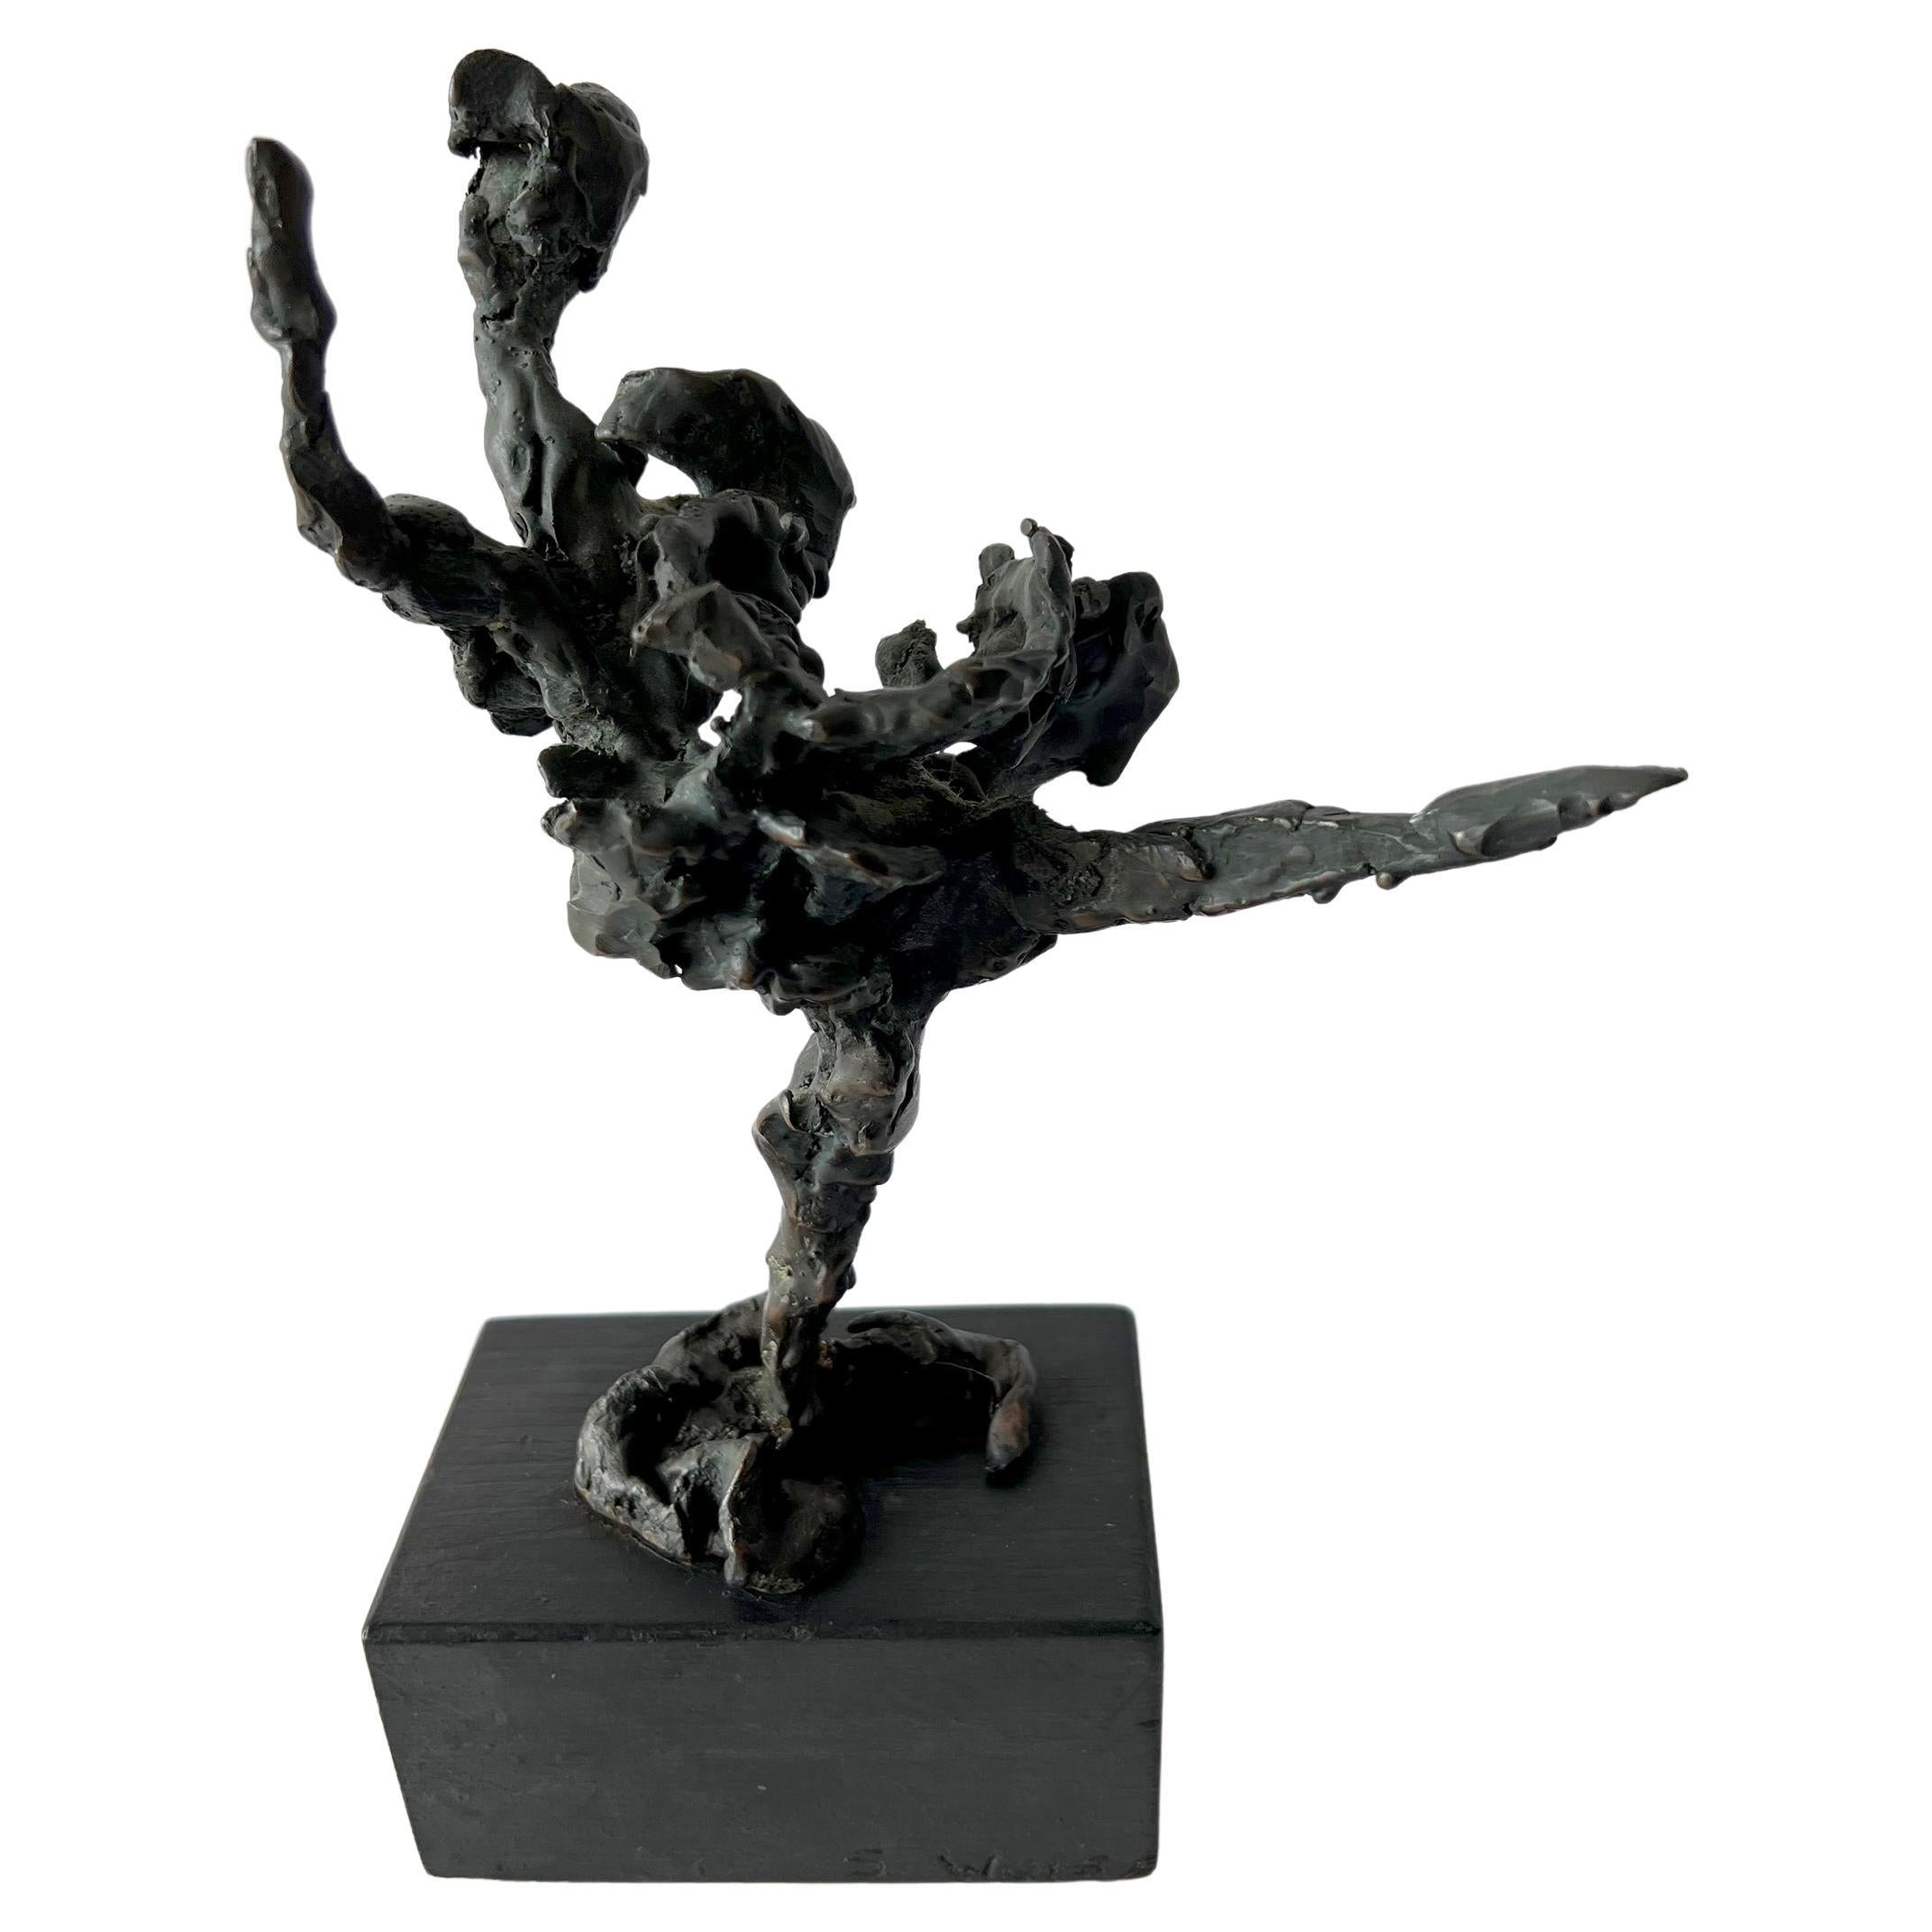 Mid-20th Century Sylvia Weiss Bronze Chicago Modern Dancer Figure on Wood Base For Sale